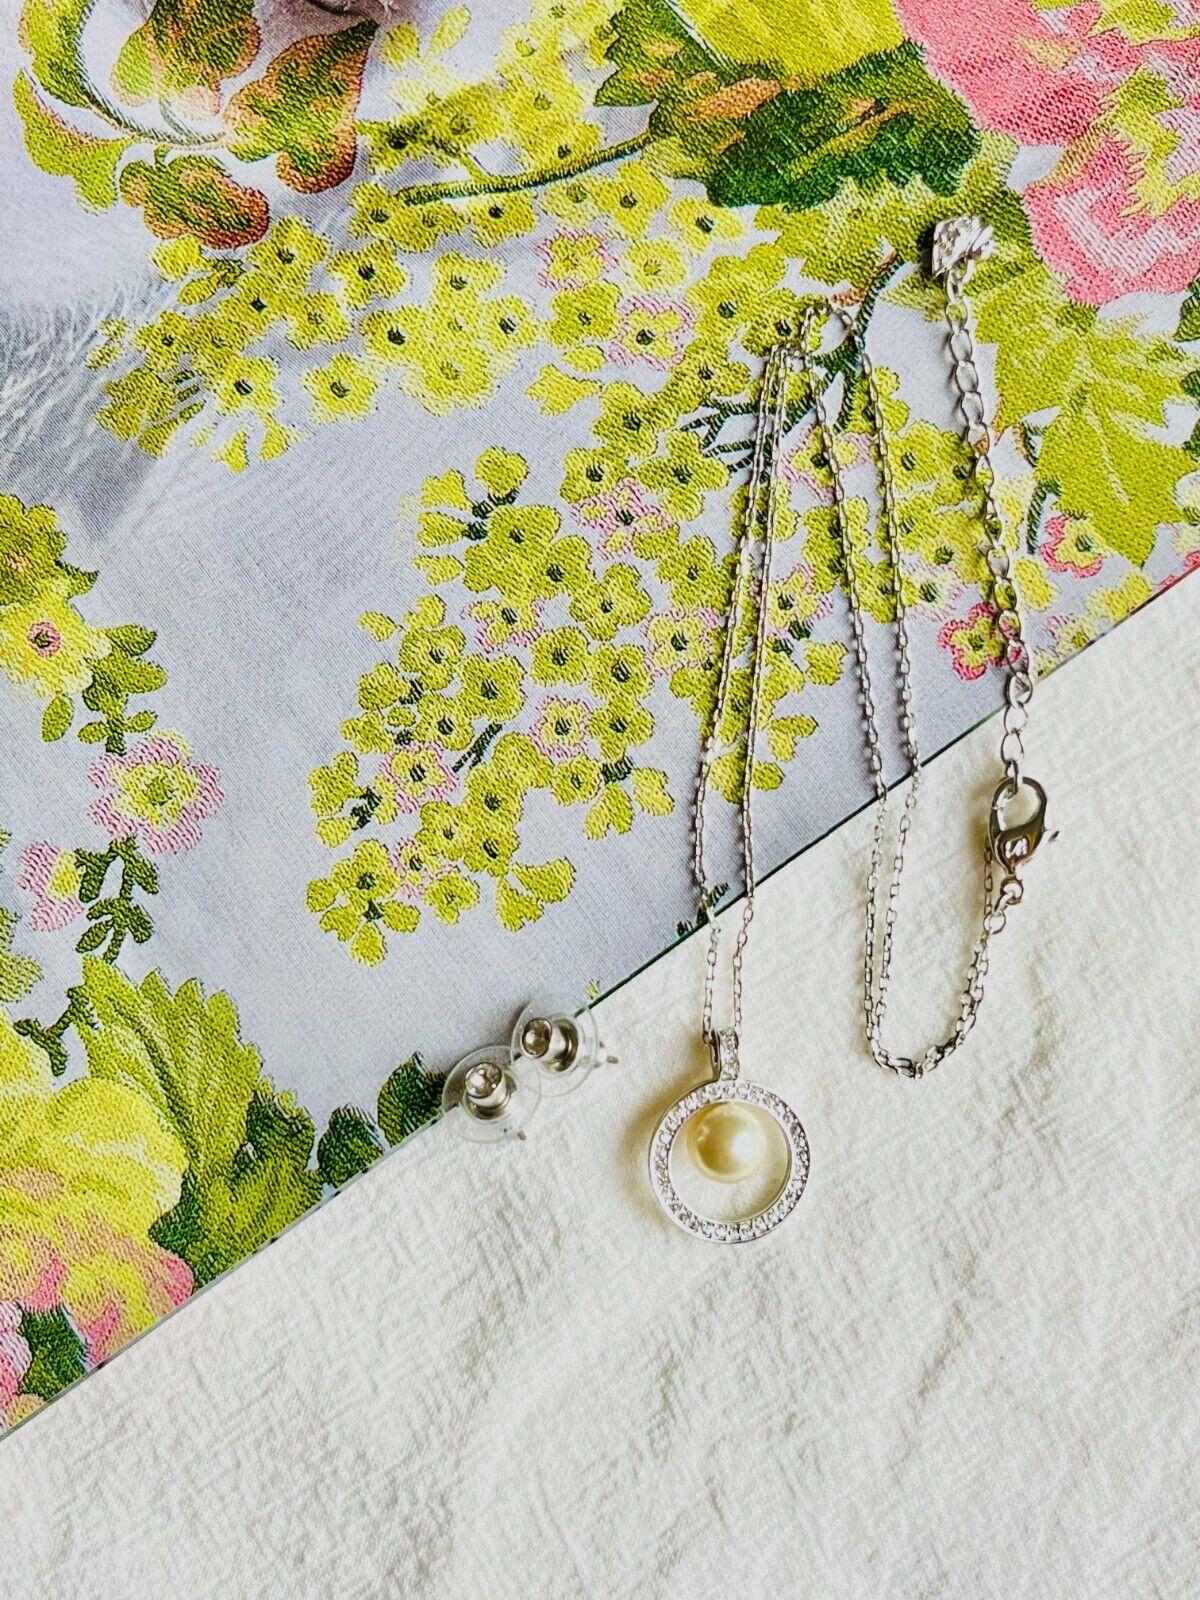 Very excellent condition. With original some old box.

Length: 38cm, extend chain 6cm. 

Pendant: 1.7 cm. Earrings: 4 mm.

_ _ _

Great for everyday wear. Come with velvet pouch and beautiful package.

Makes the perfect gift for Teens, Sisters,